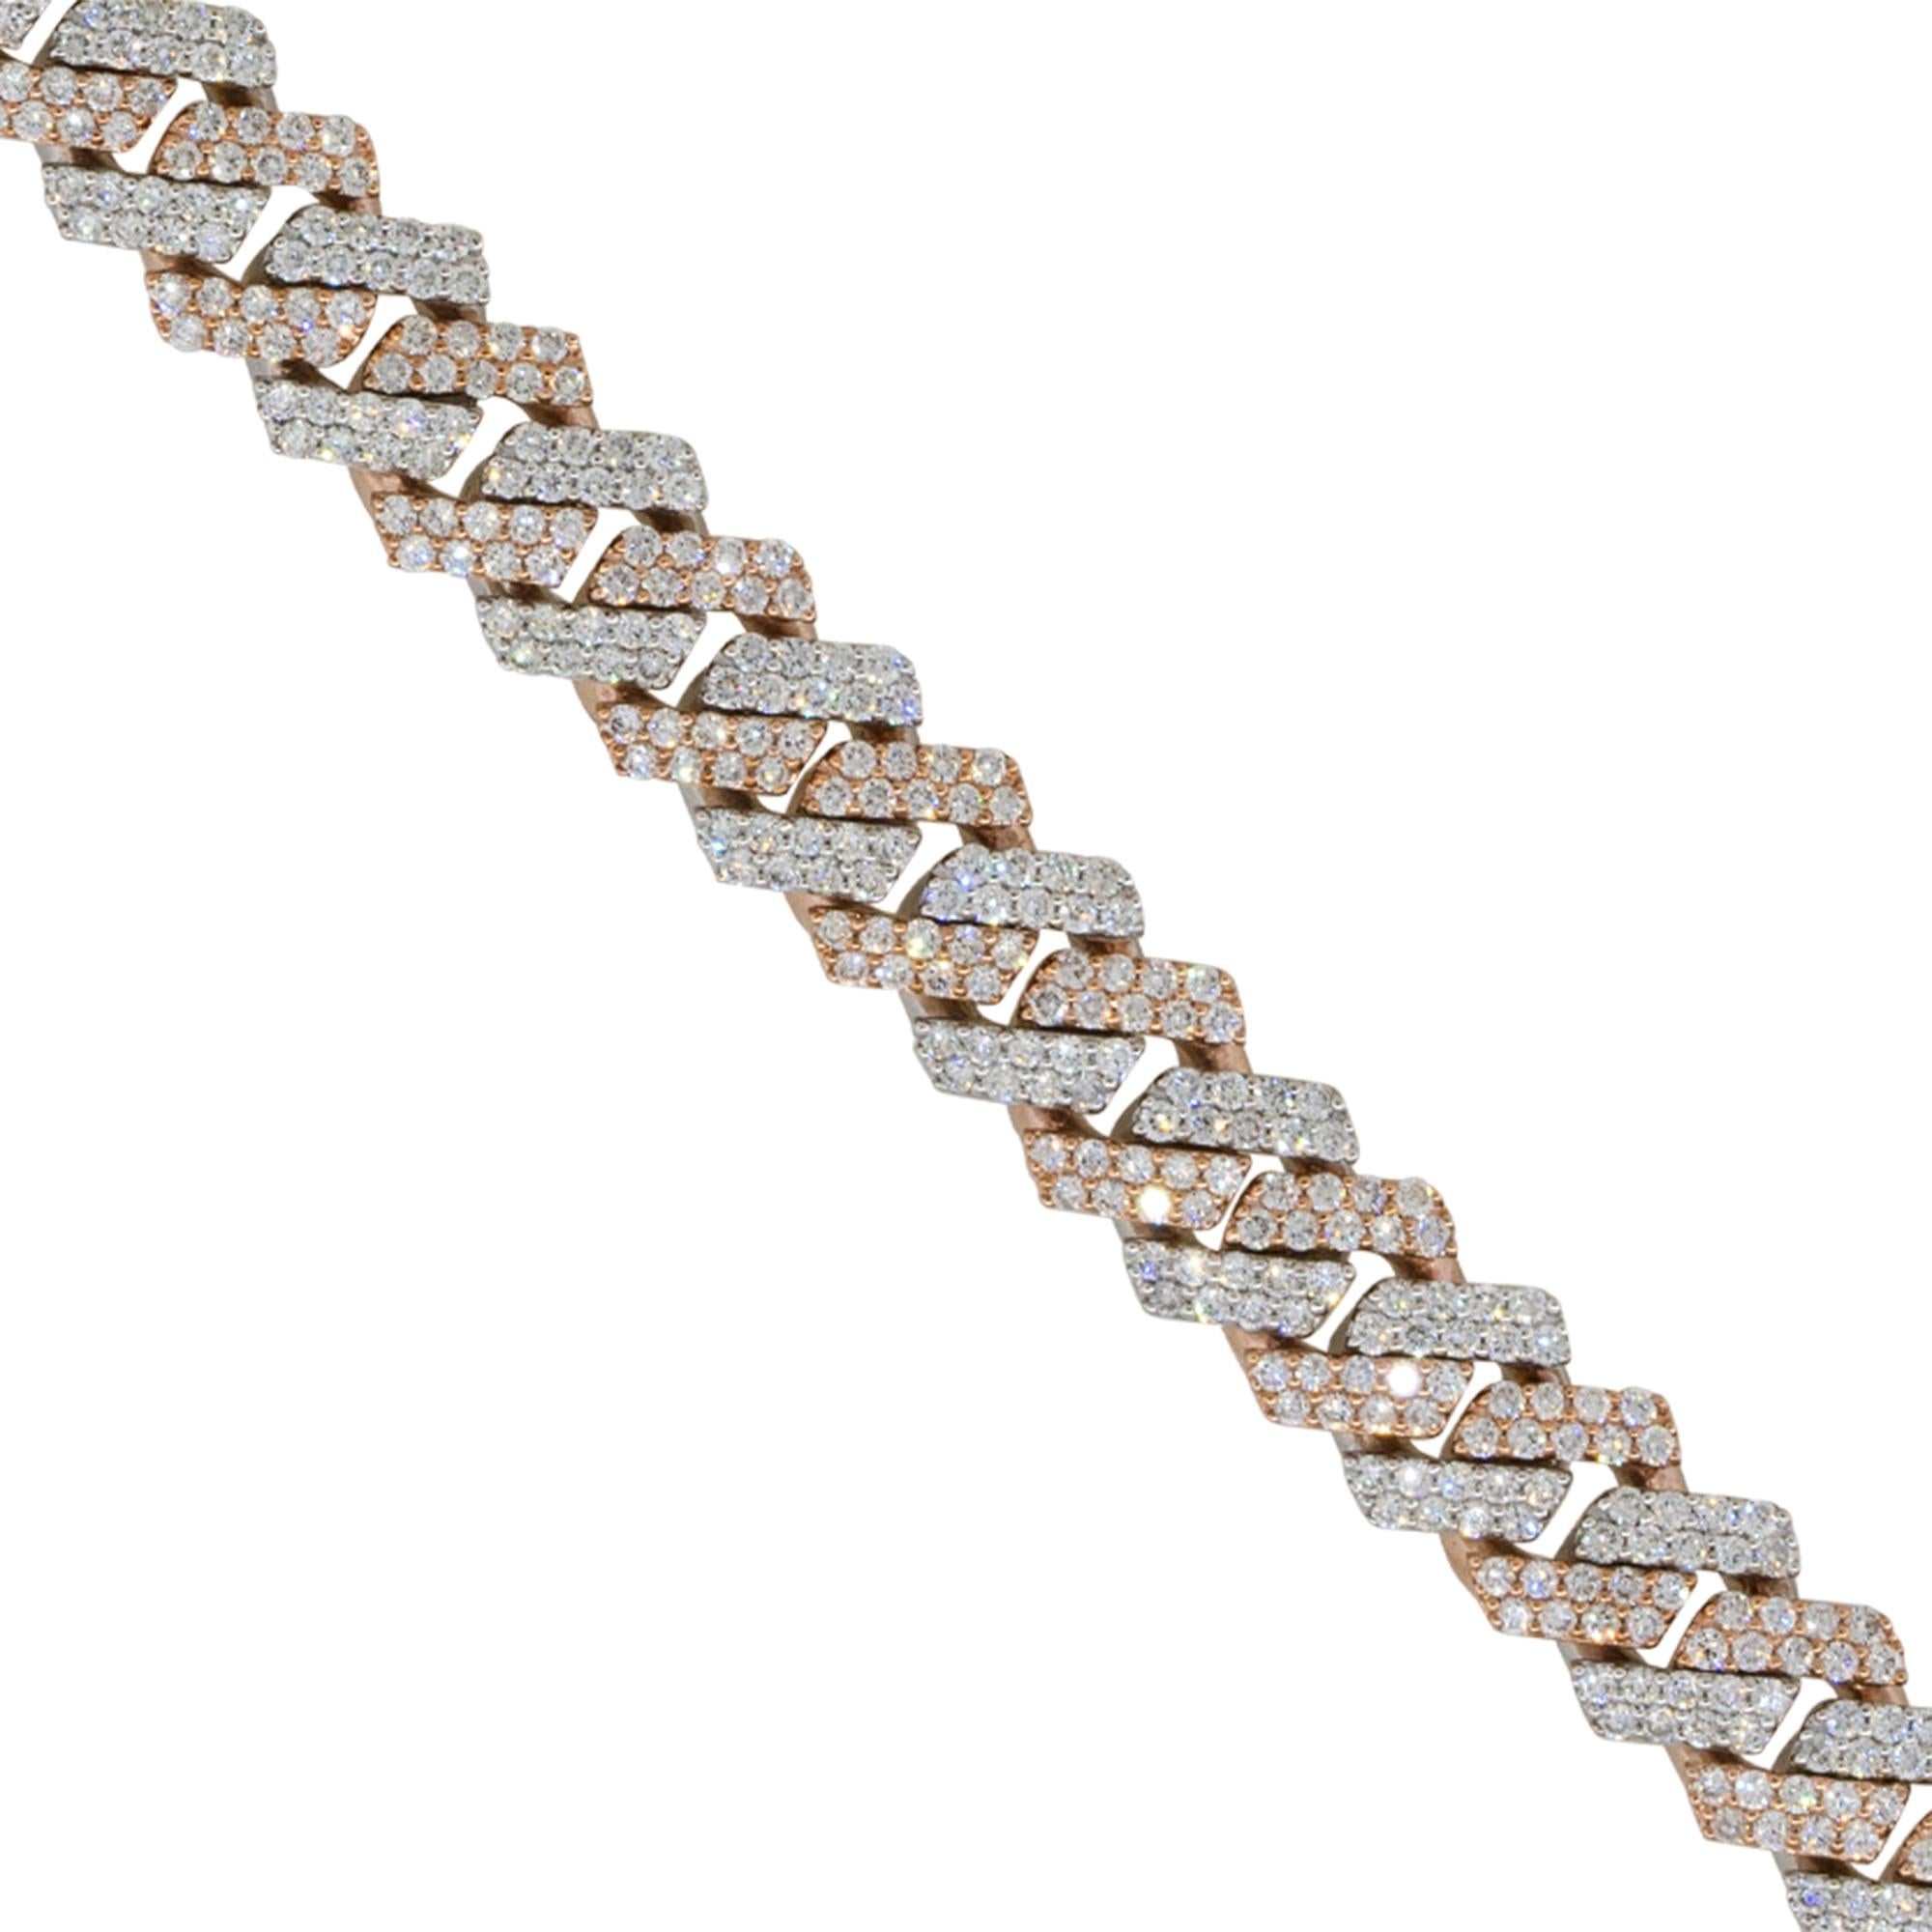 Material: 10k white gold, 10k rose gold
Diamond Details: Approx. 7.57ctw of round cut Diamonds. Diamonds are G/H in color and VS in clarity. 575 stones 
Clasp: Tongue in box with double safety latch
Measurements: measures 7